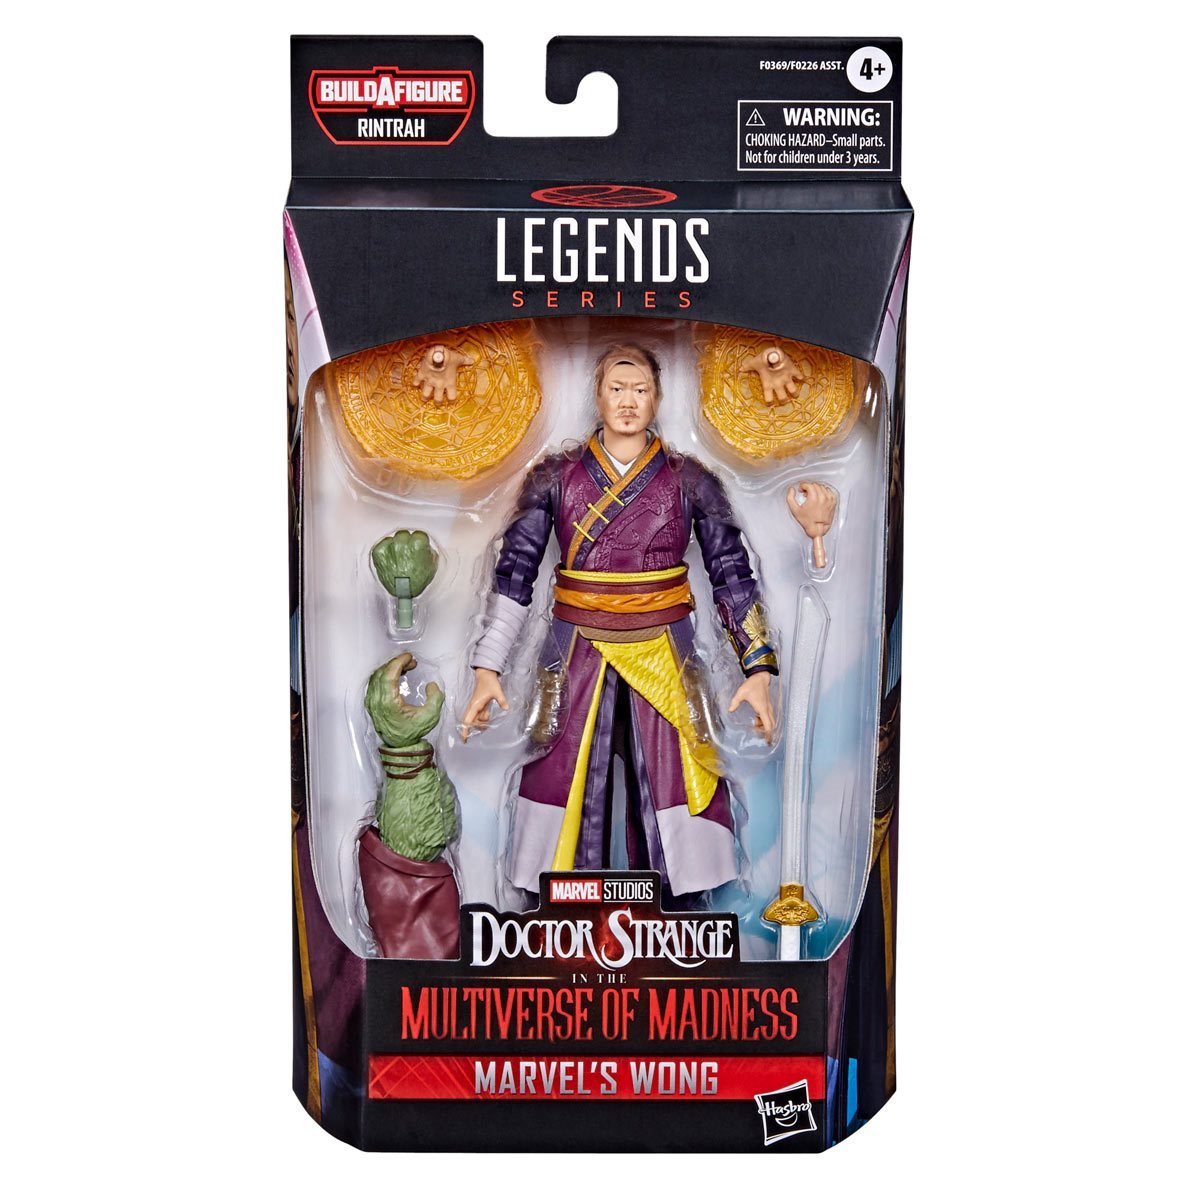 Doctor Strange in the Multiverse of Madness Marvel's Wong Hasbro No Protector Case